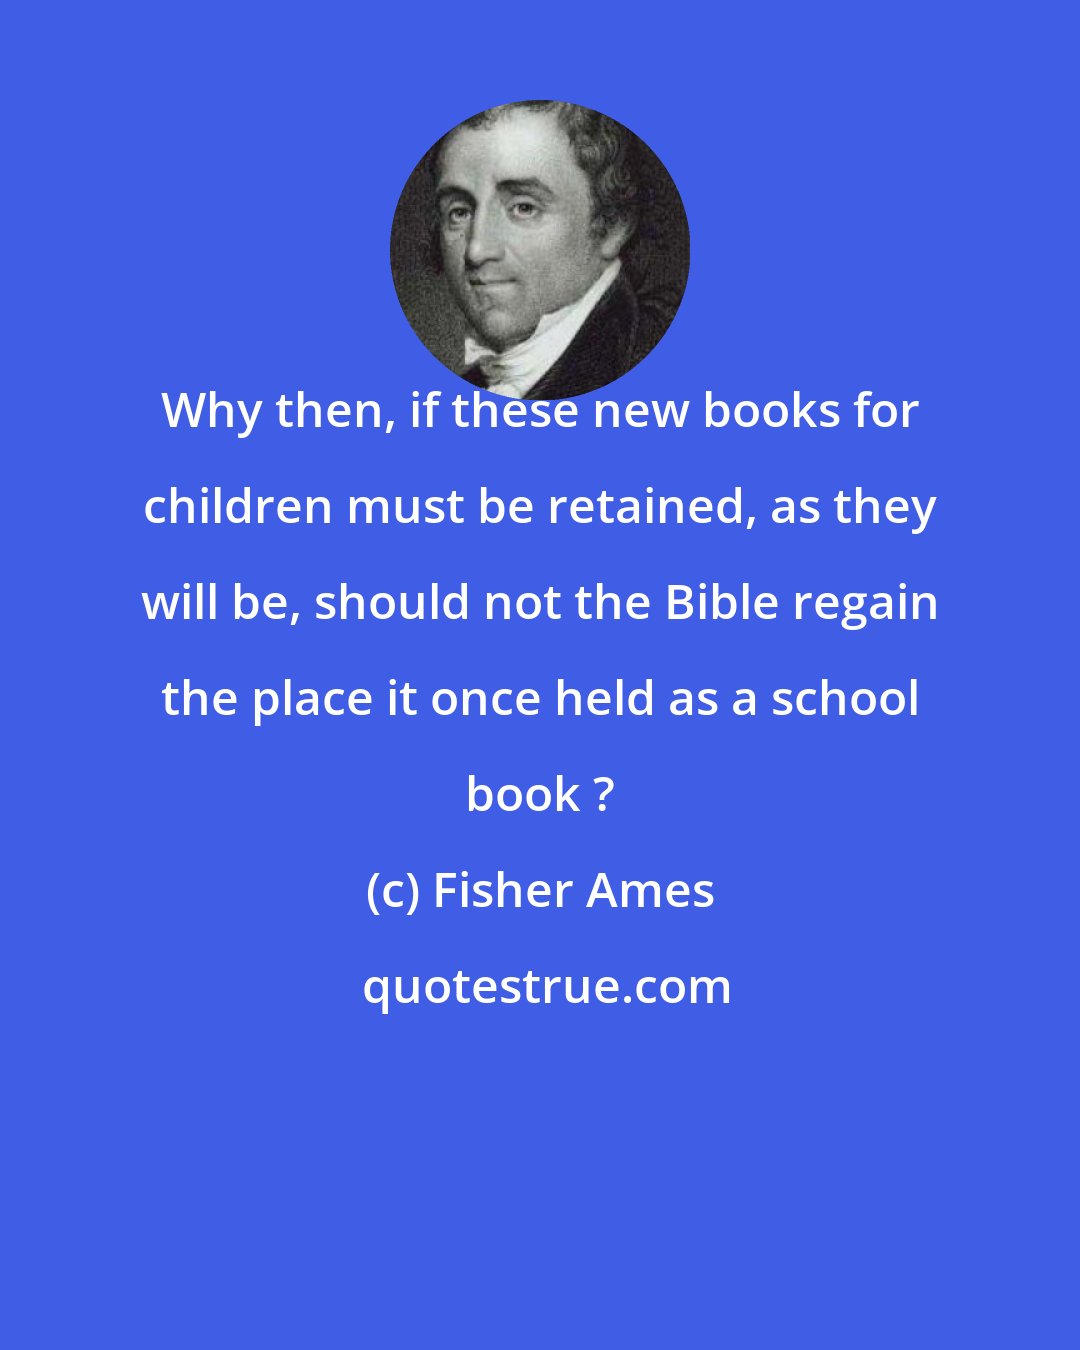 Fisher Ames: Why then, if these new books for children must be retained, as they will be, should not the Bible regain the place it once held as a school book ?